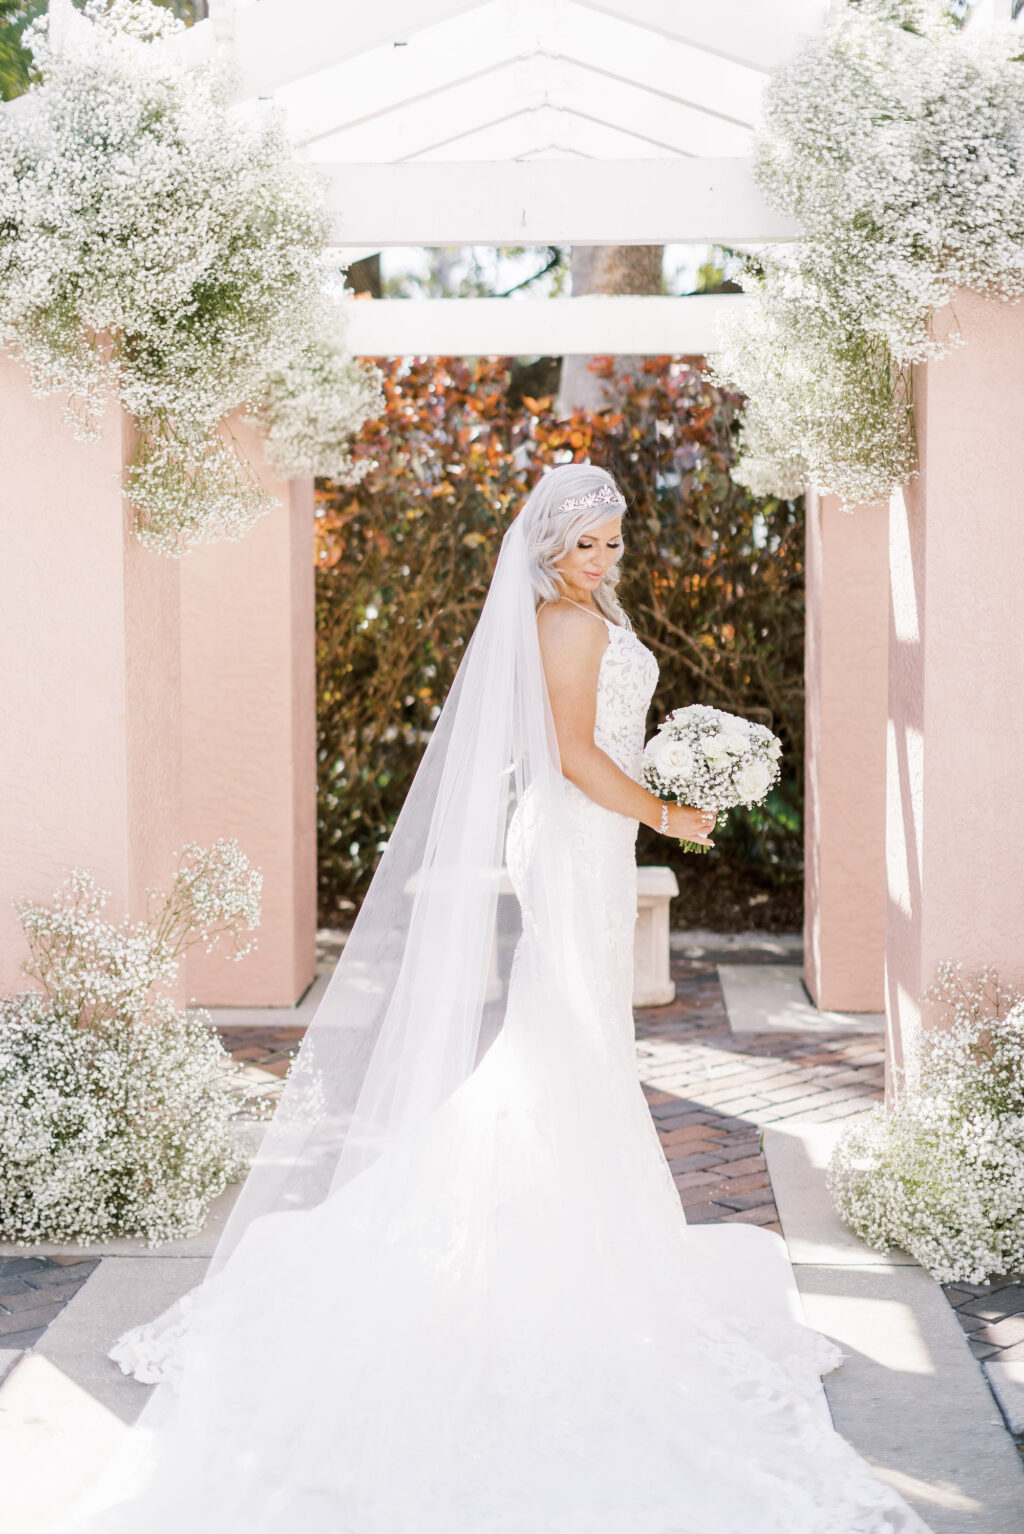 White Classic Wedding Inspiration | Cathedral Lace Wedding Veil with Baby's Breath Ceremony Decor and Bouquet | St. Pete Wedding Florist Bruce Wayne Florals